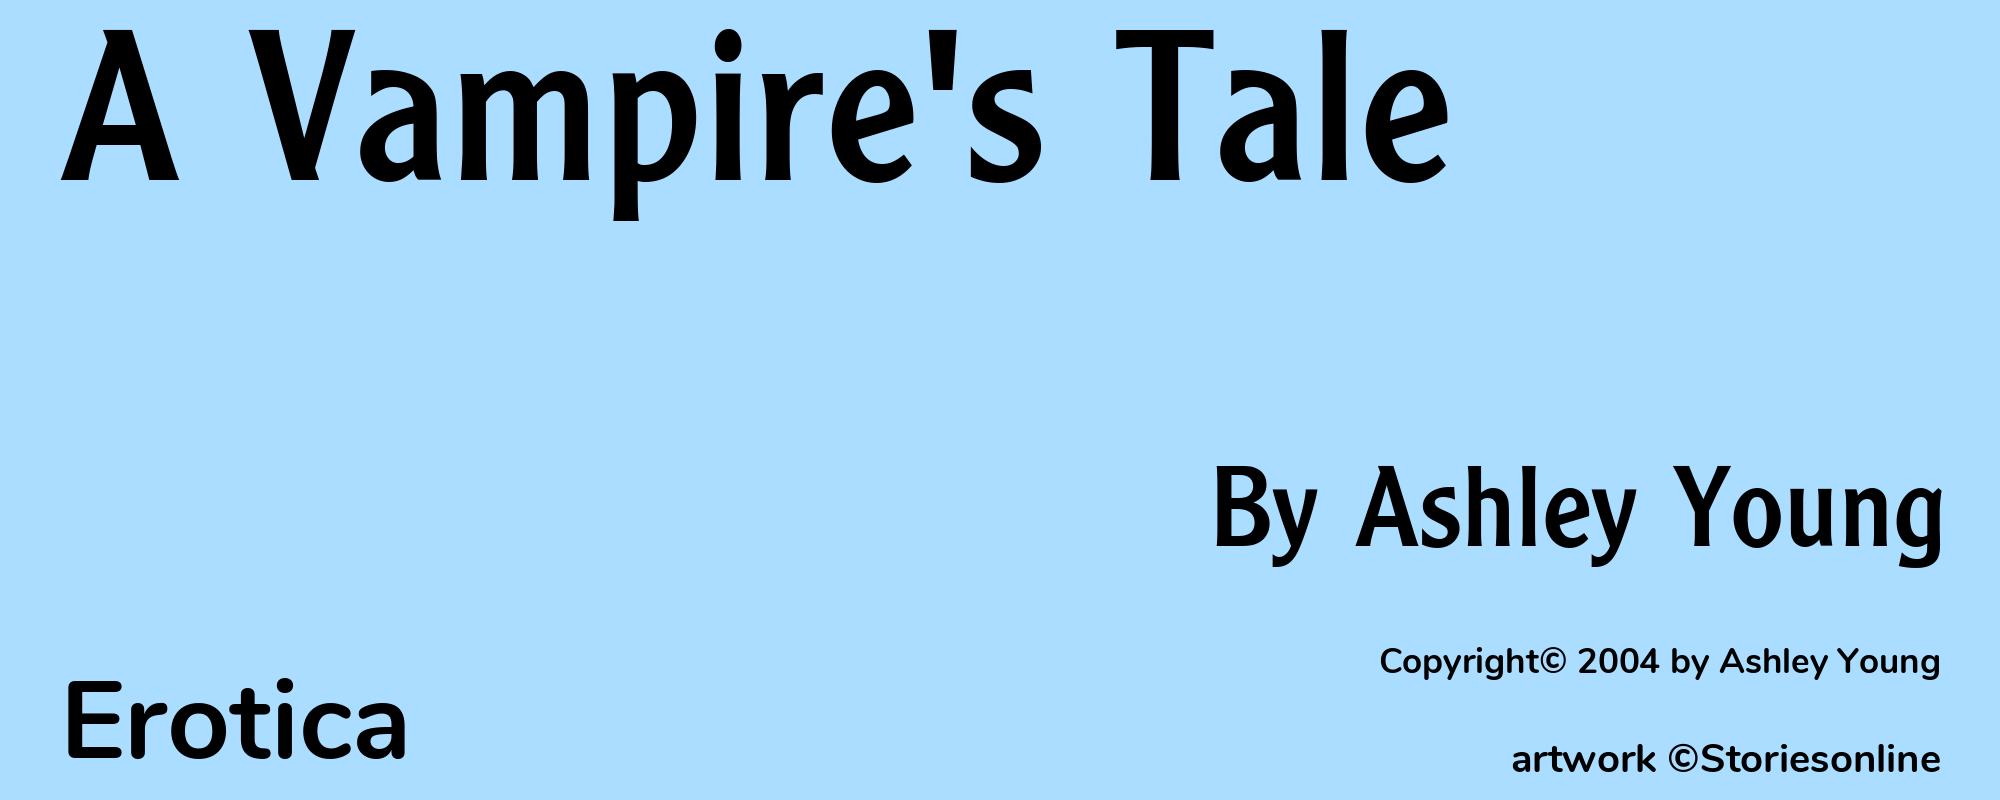 A Vampire's Tale - Cover